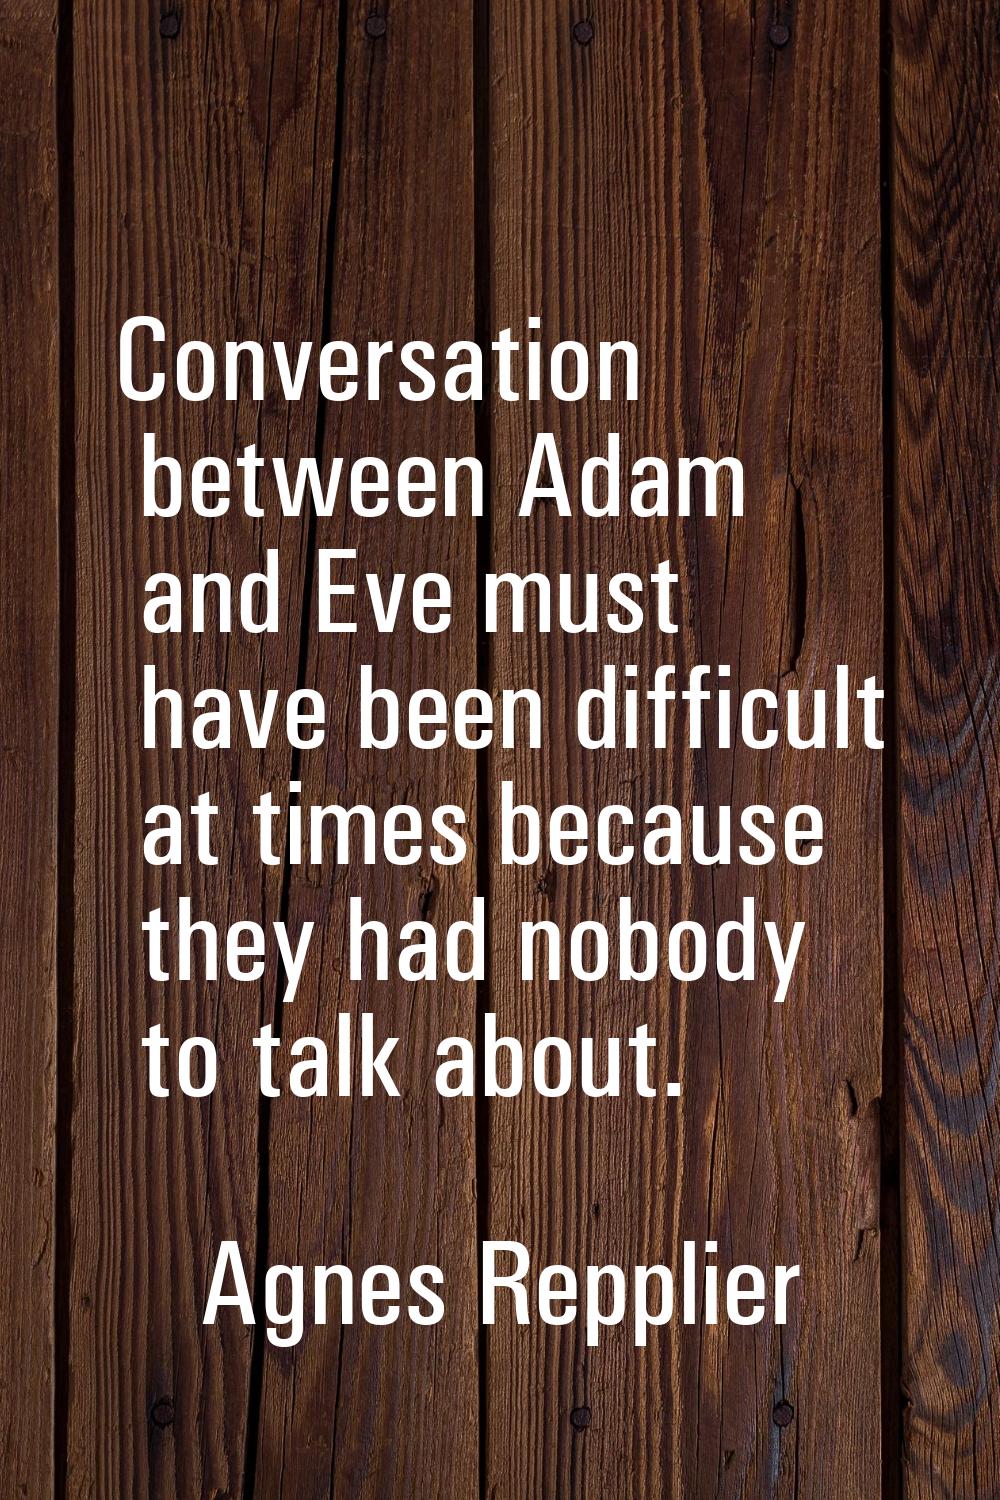 Conversation between Adam and Eve must have been difficult at times because they had nobody to talk